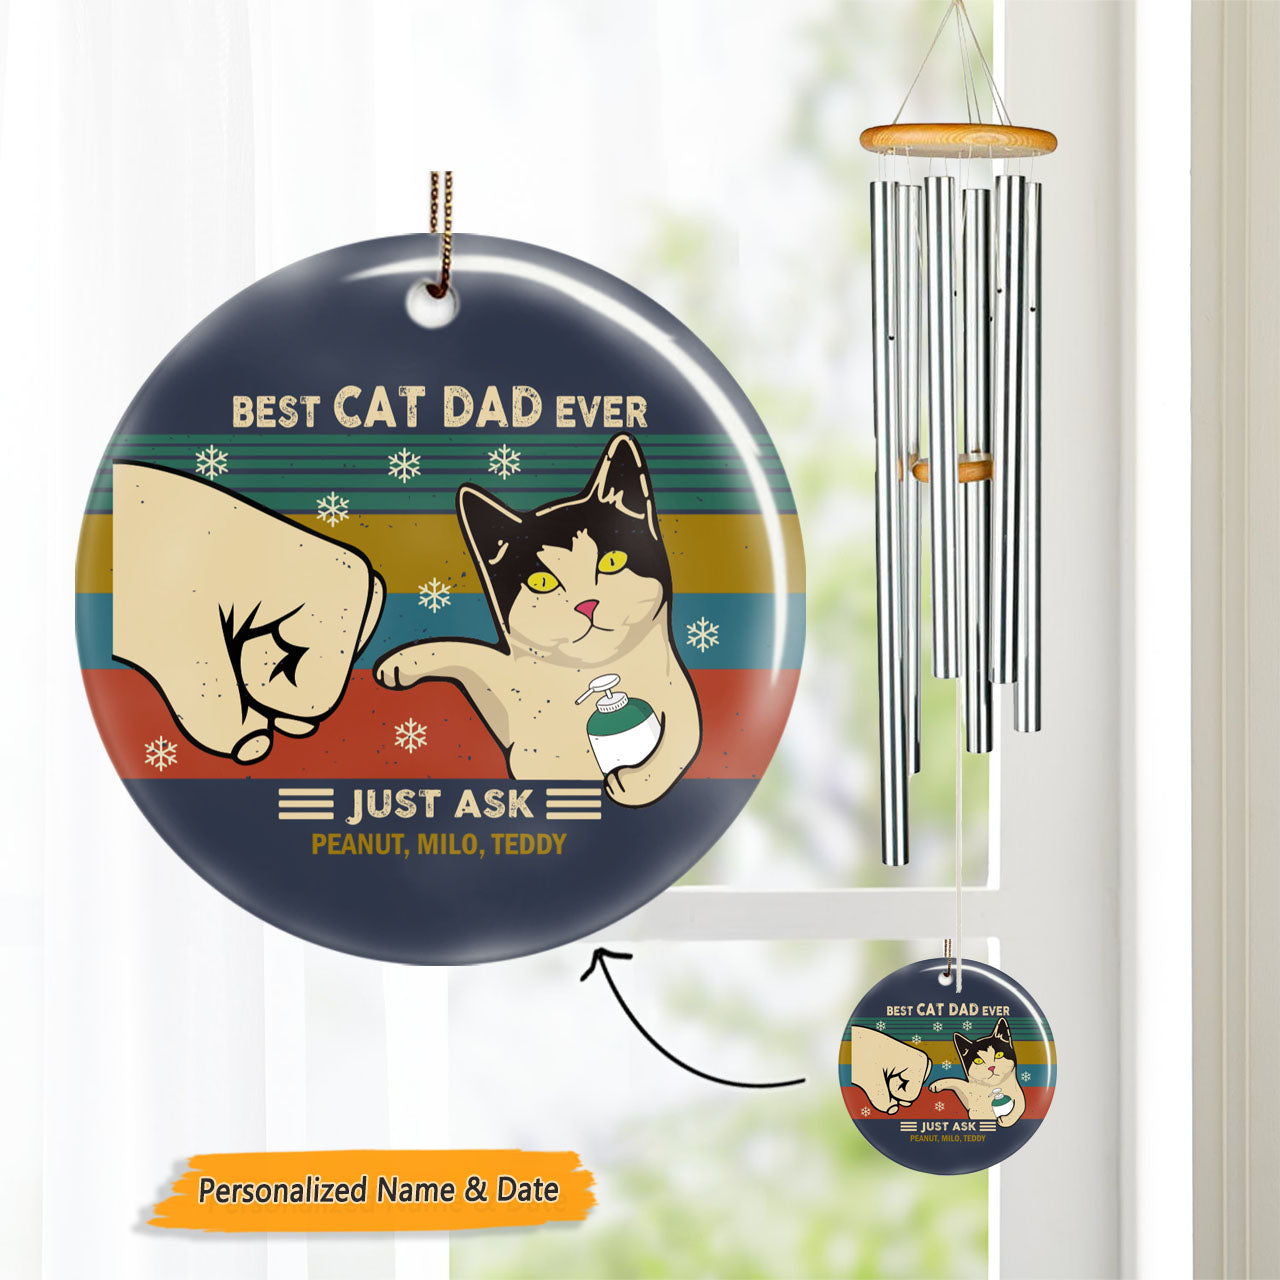 Best Cat Dad Ever Just Ask Personalized Circle Wind Chime